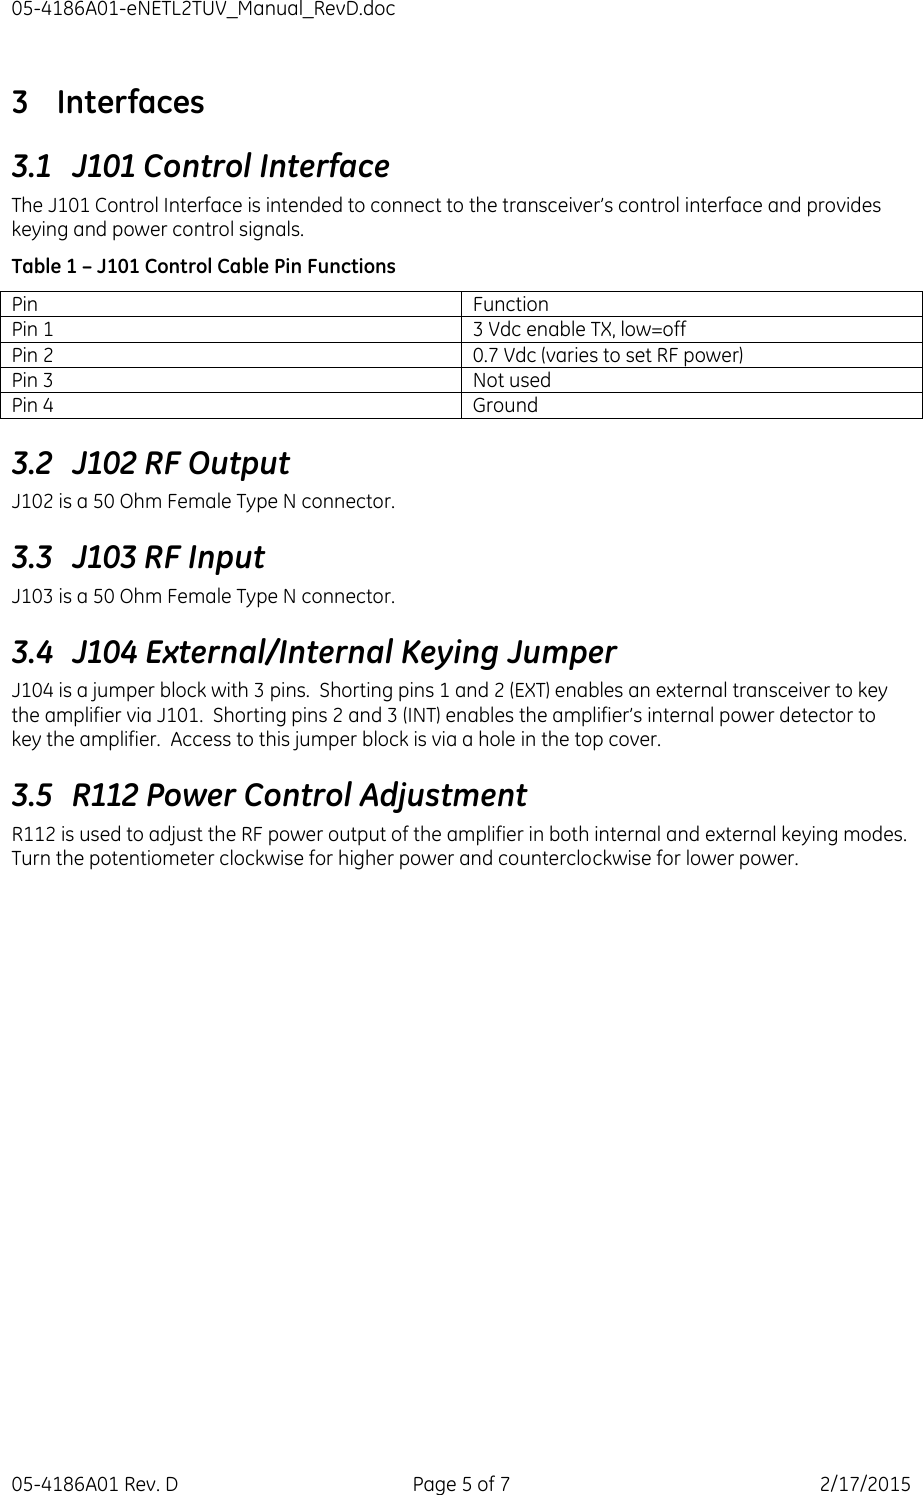 05-4186A01-eNETL2TUV_Manual_RevD.doc 05-4186A01 Rev. D  Page 5 of 7  2/17/2015 3 Interfaces 3.1 J101 Control Interface The J101 Control Interface is intended to connect to the transceiver’s control interface and provides keying and power control signals. Table 1 – J101 Control Cable Pin Functions Pin Function Pin 1 3 Vdc enable TX, low=off Pin 2 0.7 Vdc (varies to set RF power) Pin 3 Not used Pin 4 Ground 3.2 J102 RF Output J102 is a 50 Ohm Female Type N connector. 3.3 J103 RF Input J103 is a 50 Ohm Female Type N connector. 3.4 J104 External/Internal Keying Jumper J104 is a jumper block with 3 pins.  Shorting pins 1 and 2 (EXT) enables an external transceiver to key the amplifier via J101.  Shorting pins 2 and 3 (INT) enables the amplifier’s internal power detector to key the amplifier.  Access to this jumper block is via a hole in the top cover. 3.5 R112 Power Control Adjustment R112 is used to adjust the RF power output of the amplifier in both internal and external keying modes.  Turn the potentiometer clockwise for higher power and counterclockwise for lower power. 